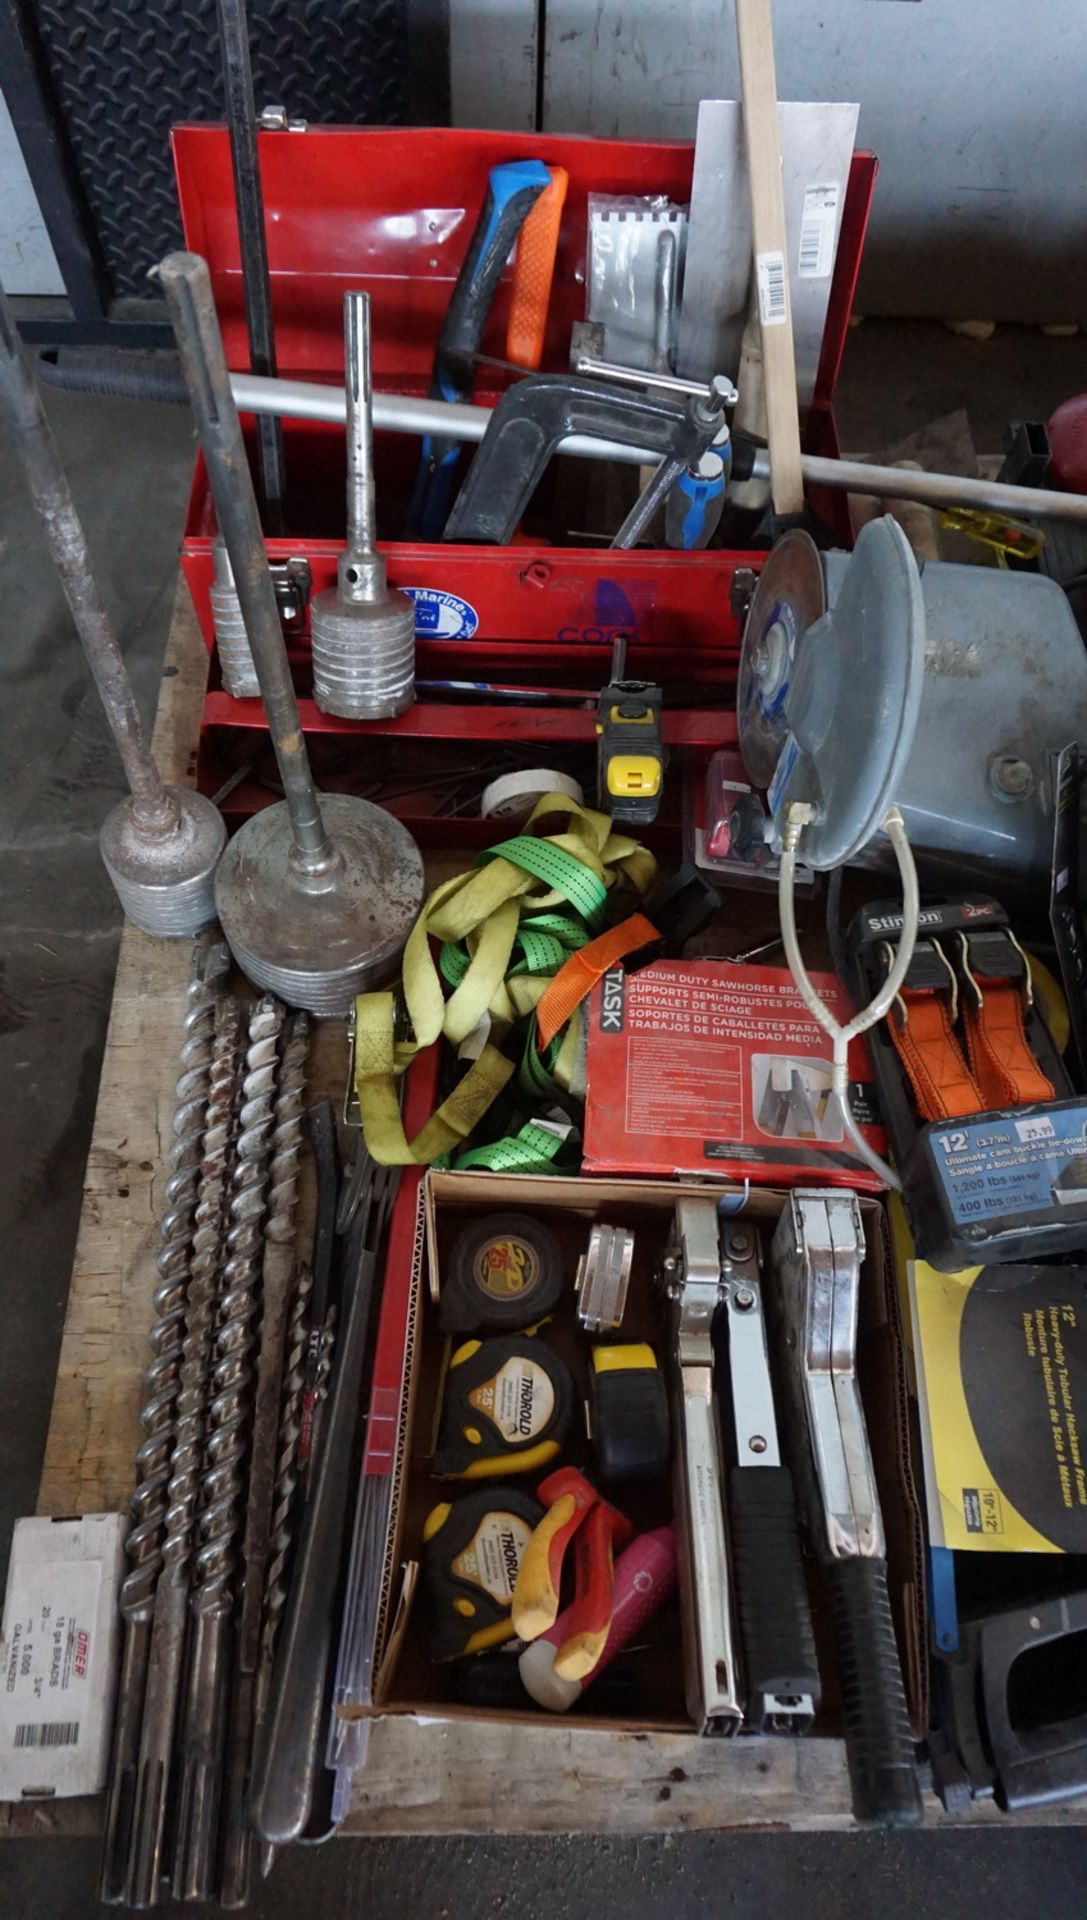 CONCRETE HOLE CORING BITS, HAMMER, STAPLERS, STAGE CORD, & RATCHET STRAPS (1 SKID) - Image 2 of 4